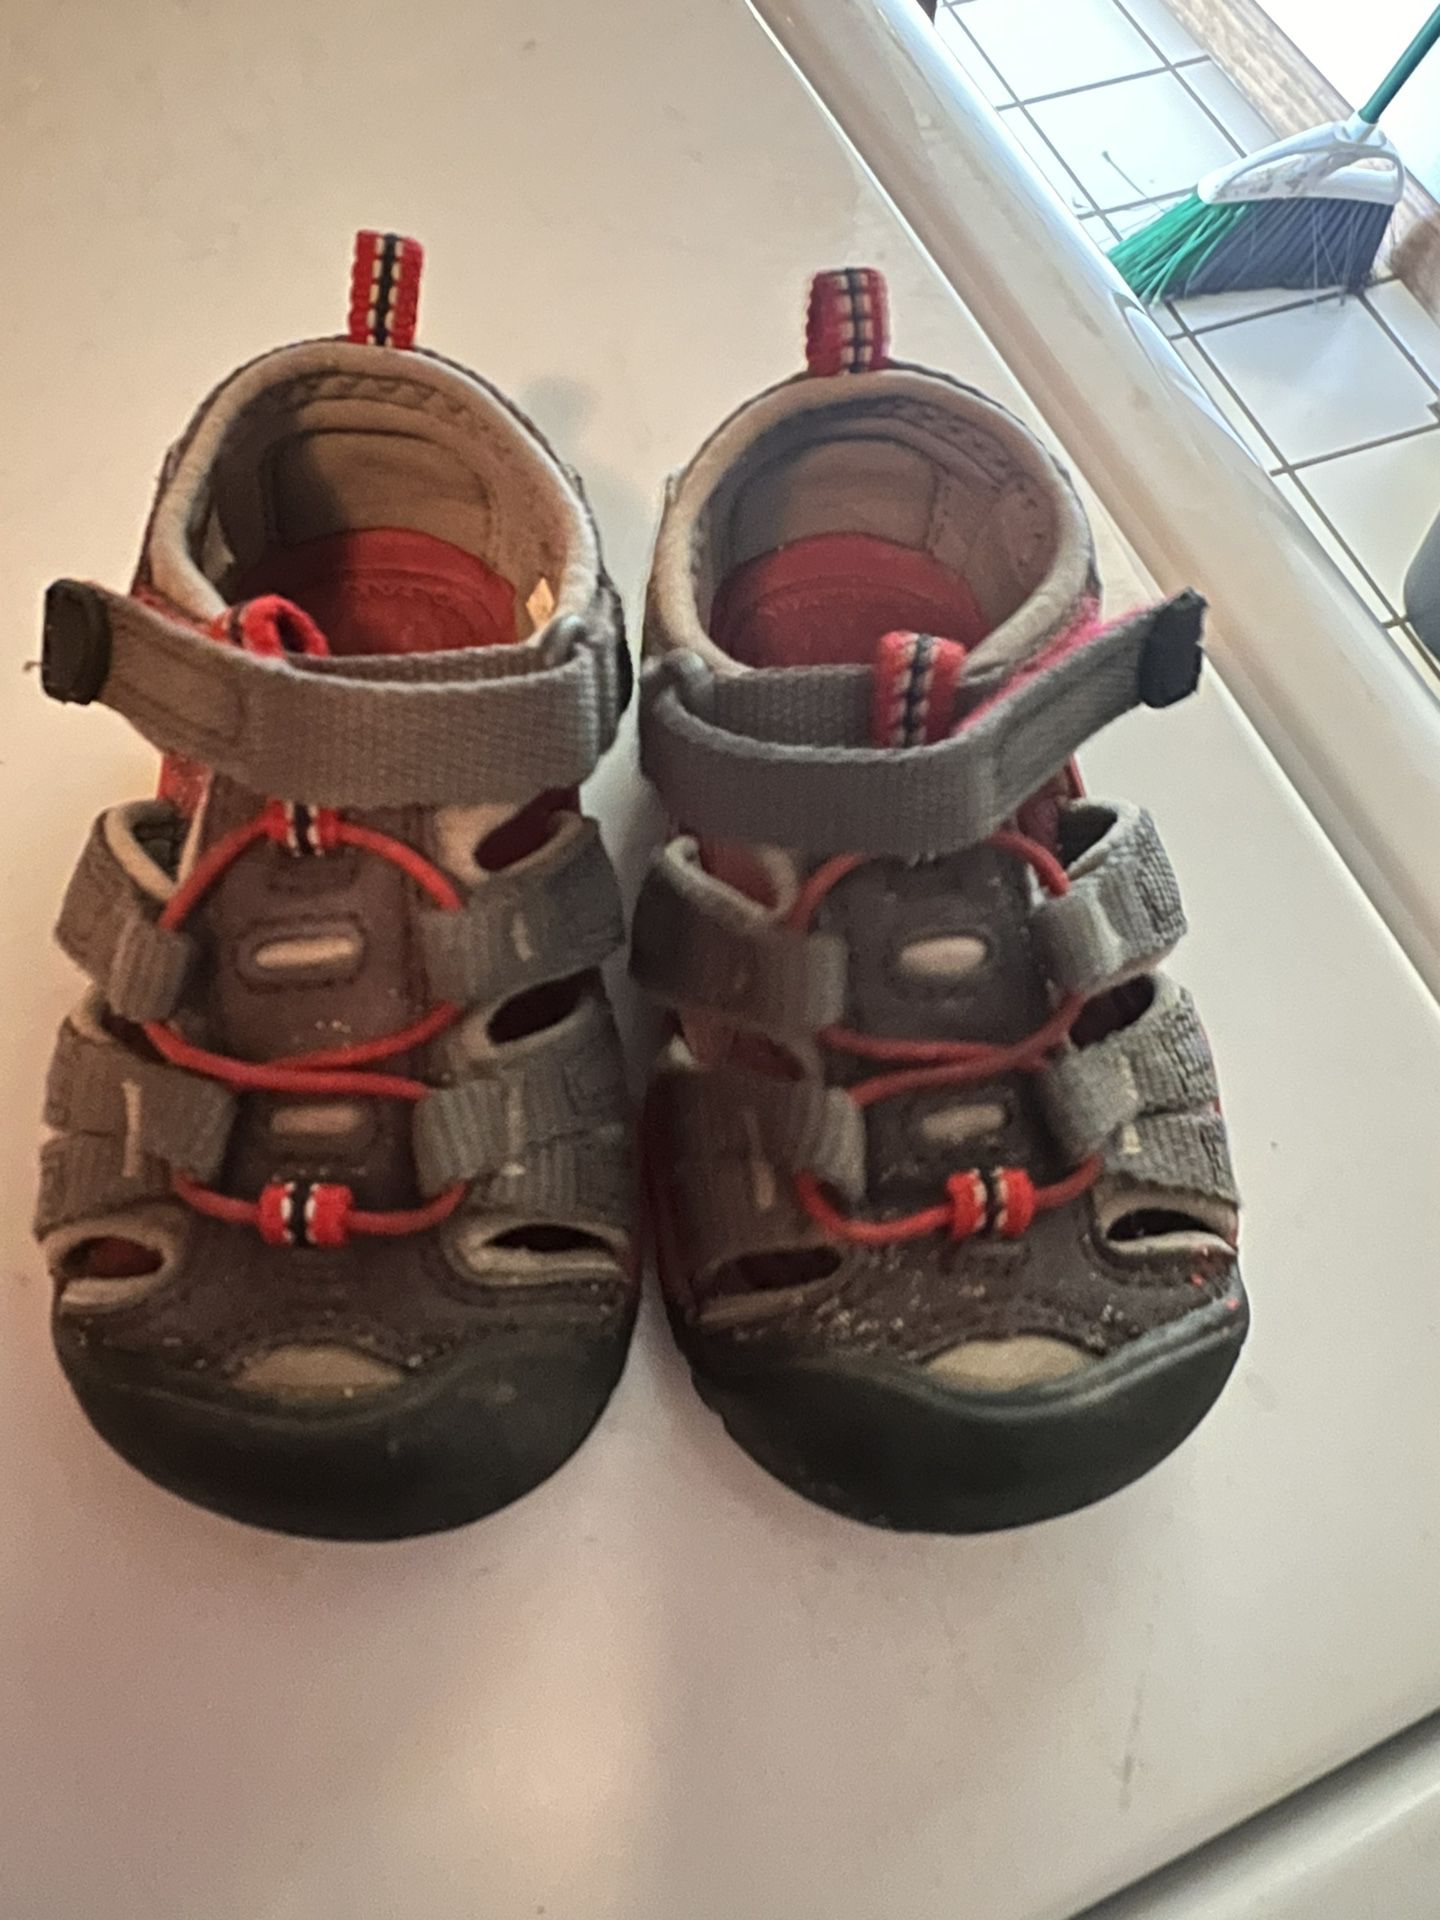 Toddler Keen Shoes